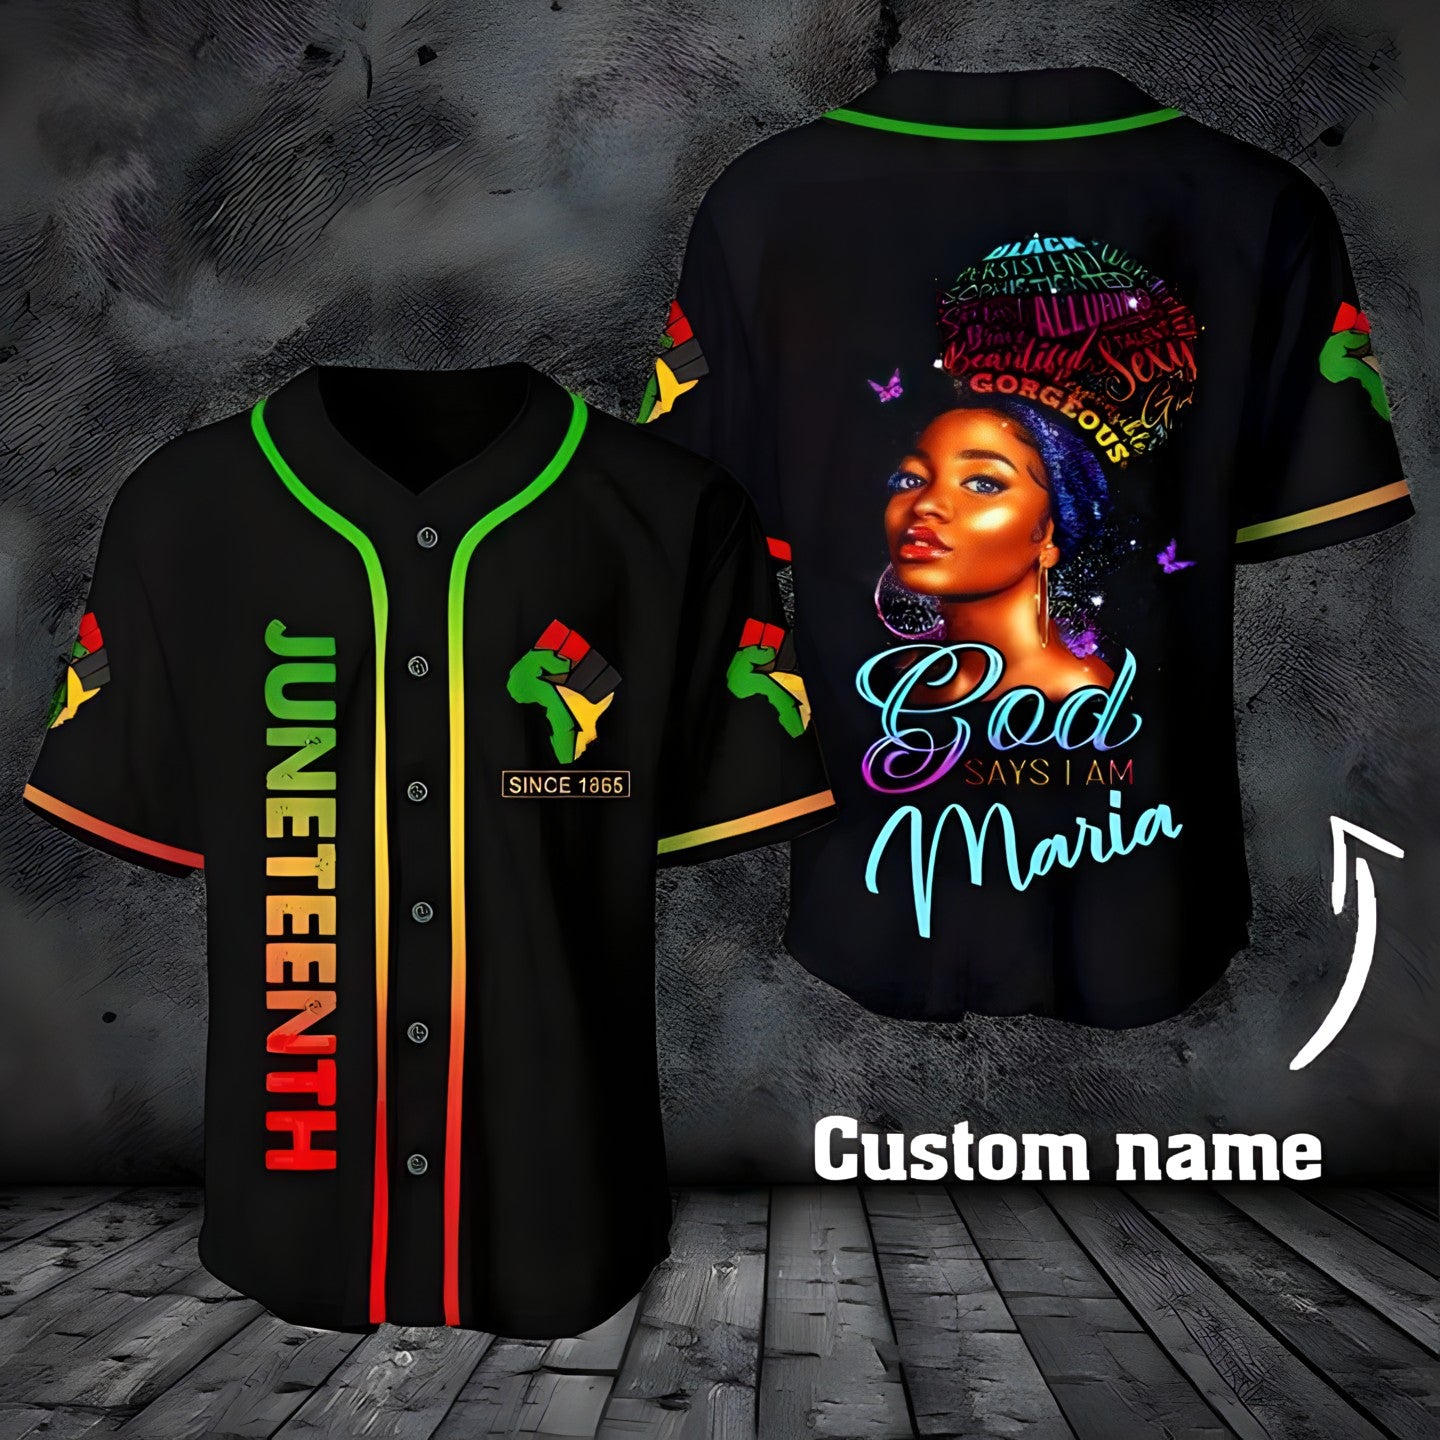 Personalized Name Juneteenth Since 1865 Black girl God Jesus say you are Baseball Tee Jersey Shirts 3D